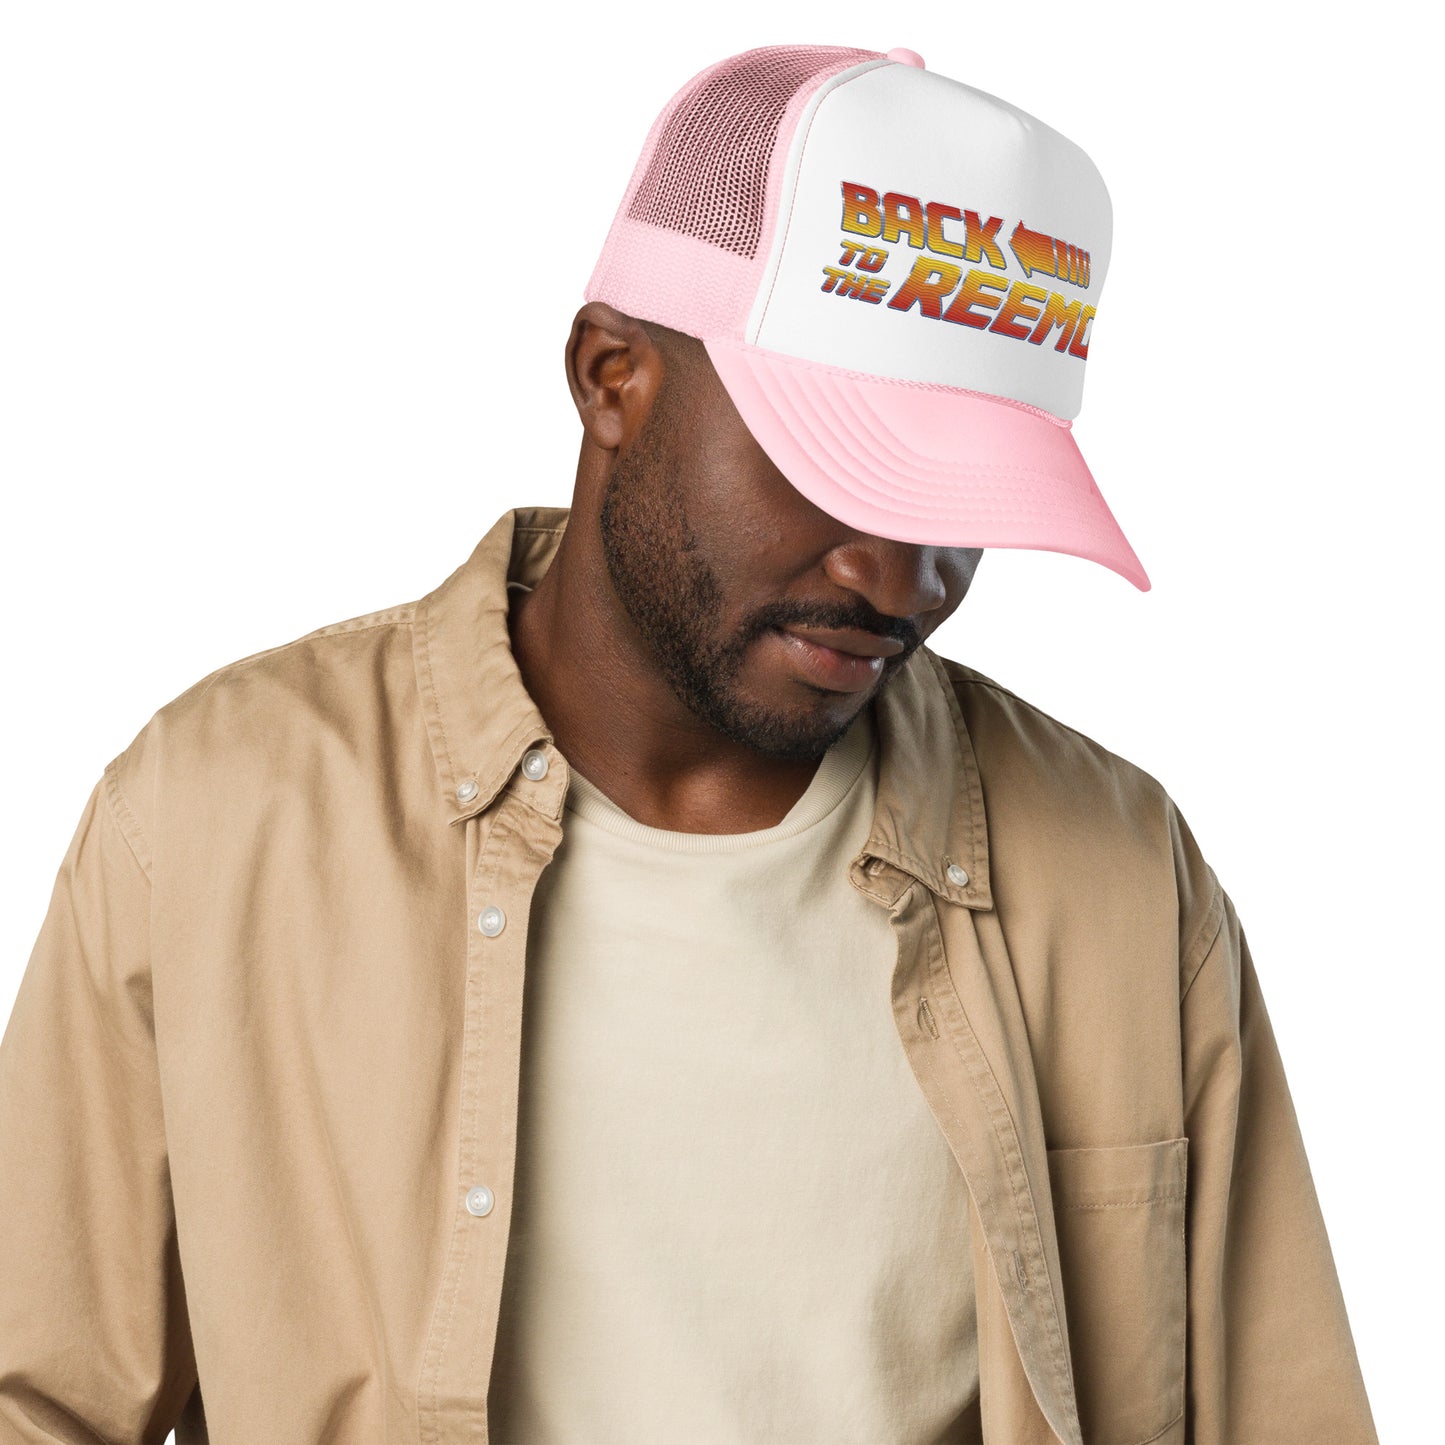 "Back To The Reemo" trucker hat